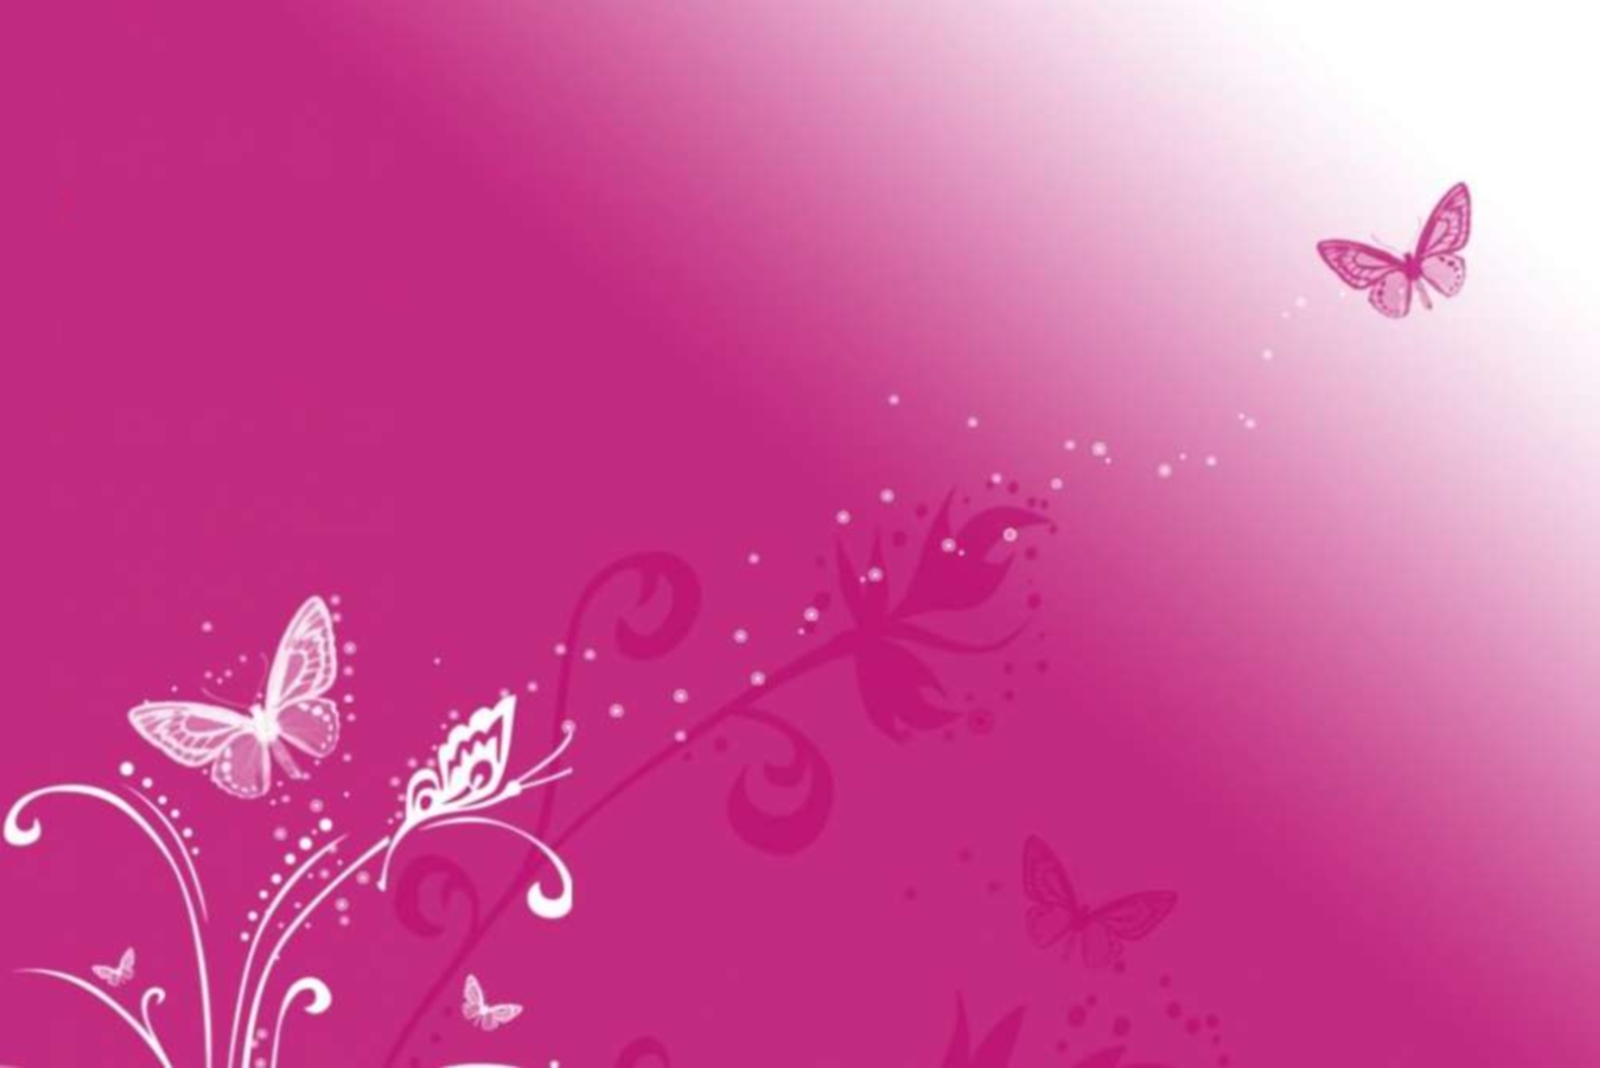  Butterfly Vector Background HD Wallpaper Vector Designs Wallpapers